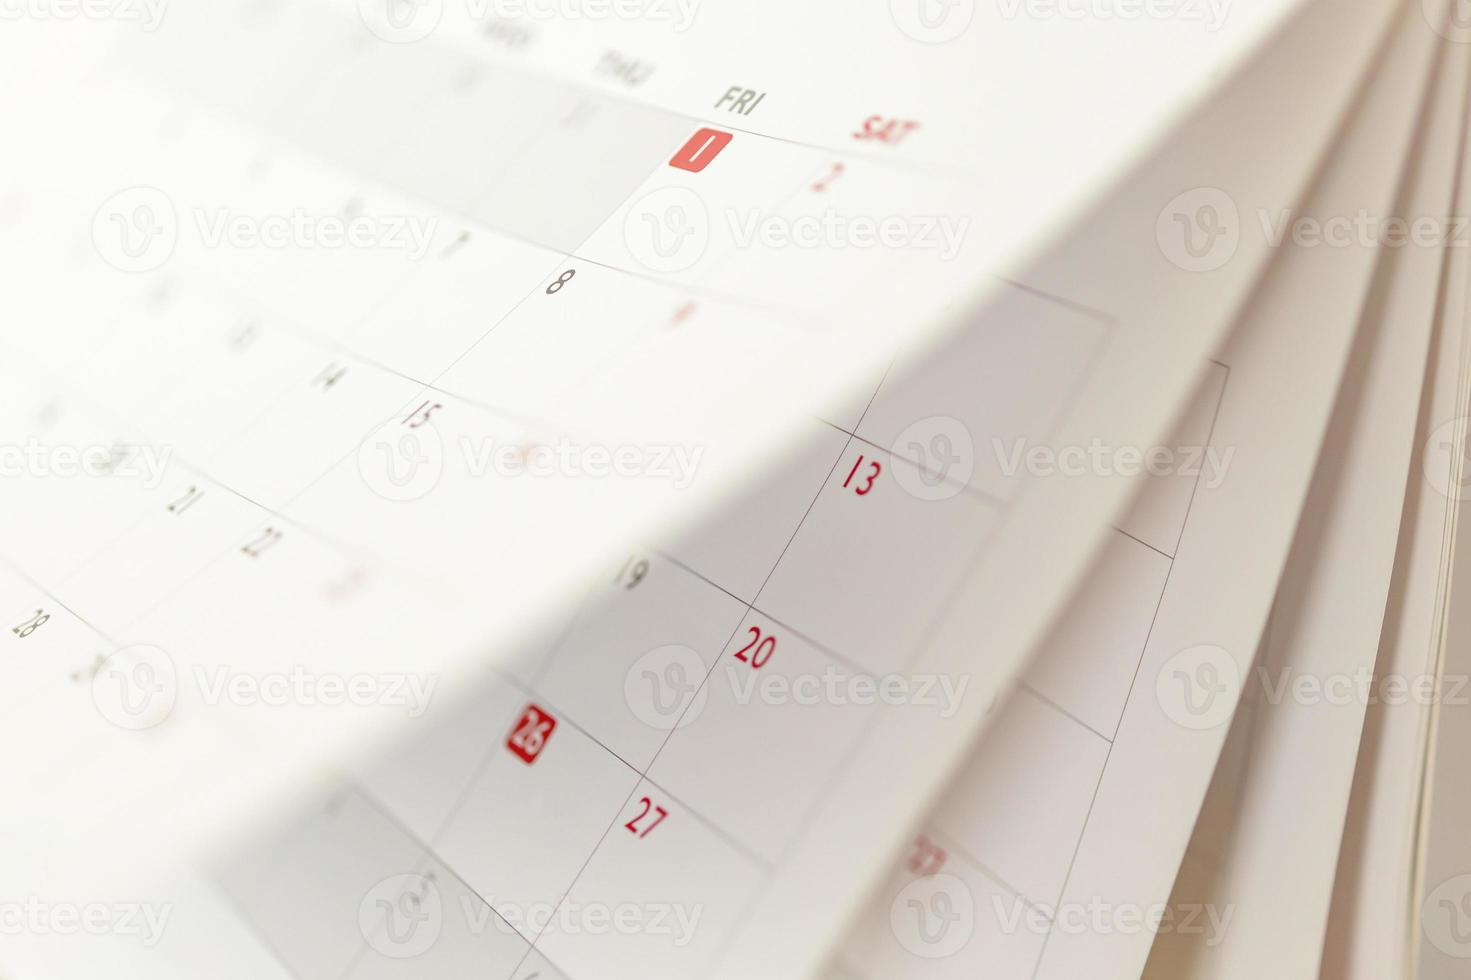 Calendar page flipping sheet close up blur background business schedule planning appointment meeting concept photo